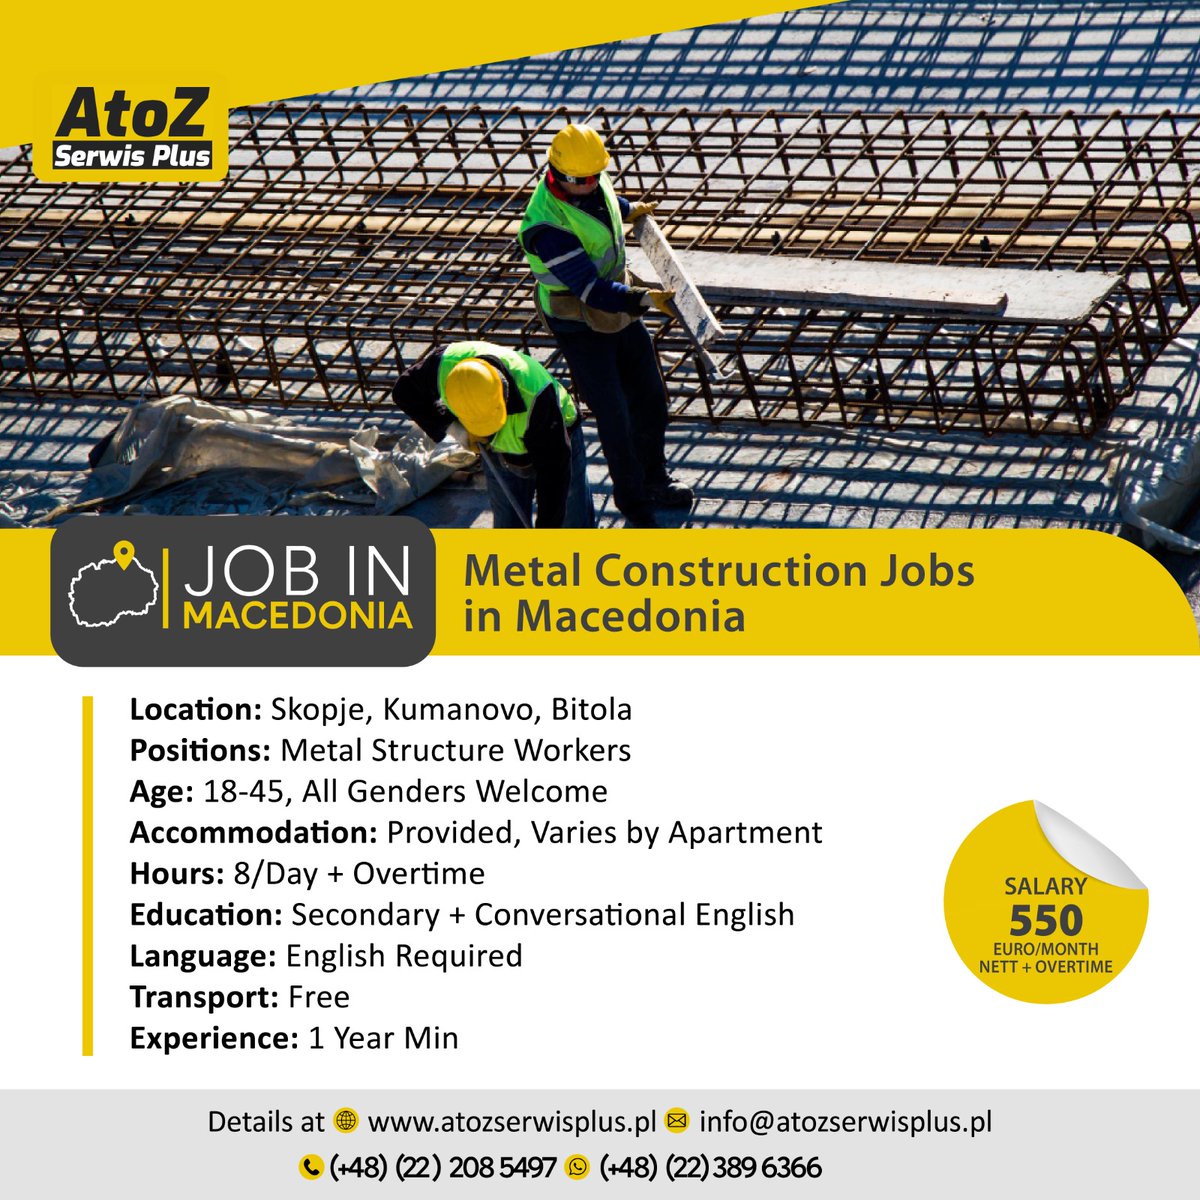 🏗️  Metal Construction  Jobs in Macedonia 🔩

Location: Skopje, Kumanovo, Bitola
Positions: Metal Structure Workers
Age: 18-45, All Genders Welcome
Accommodation: Provided, Varies by Apartment
Hours: 8/day + Overtime
Education: Secondary + Conversational English
Language: English